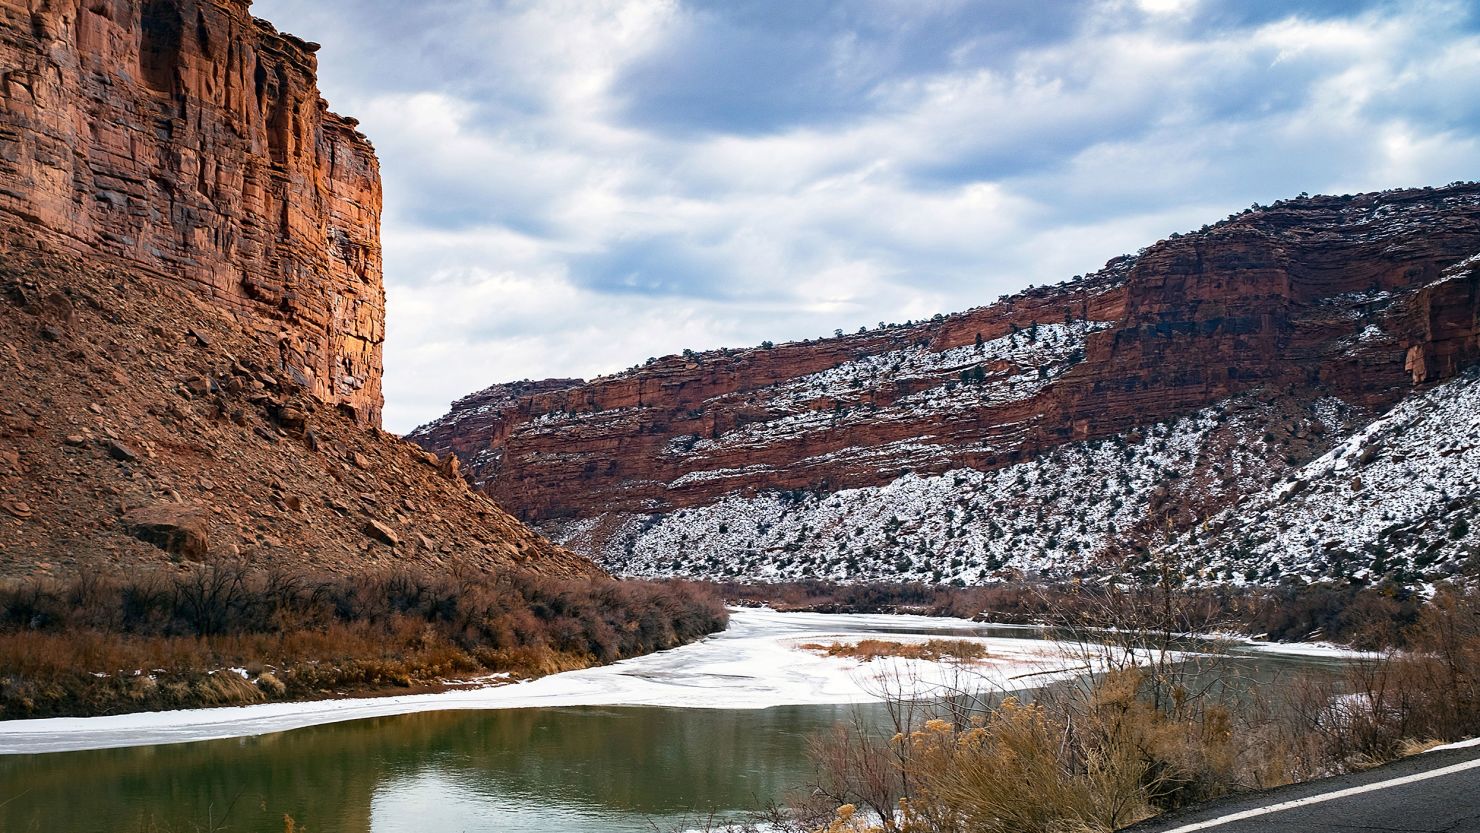 A new analysis found a declining trend in snowpack across 82 out of 169 major Northern Hemisphere river basins, including the Colorado River in the US, which winds its way along the state of Utah.